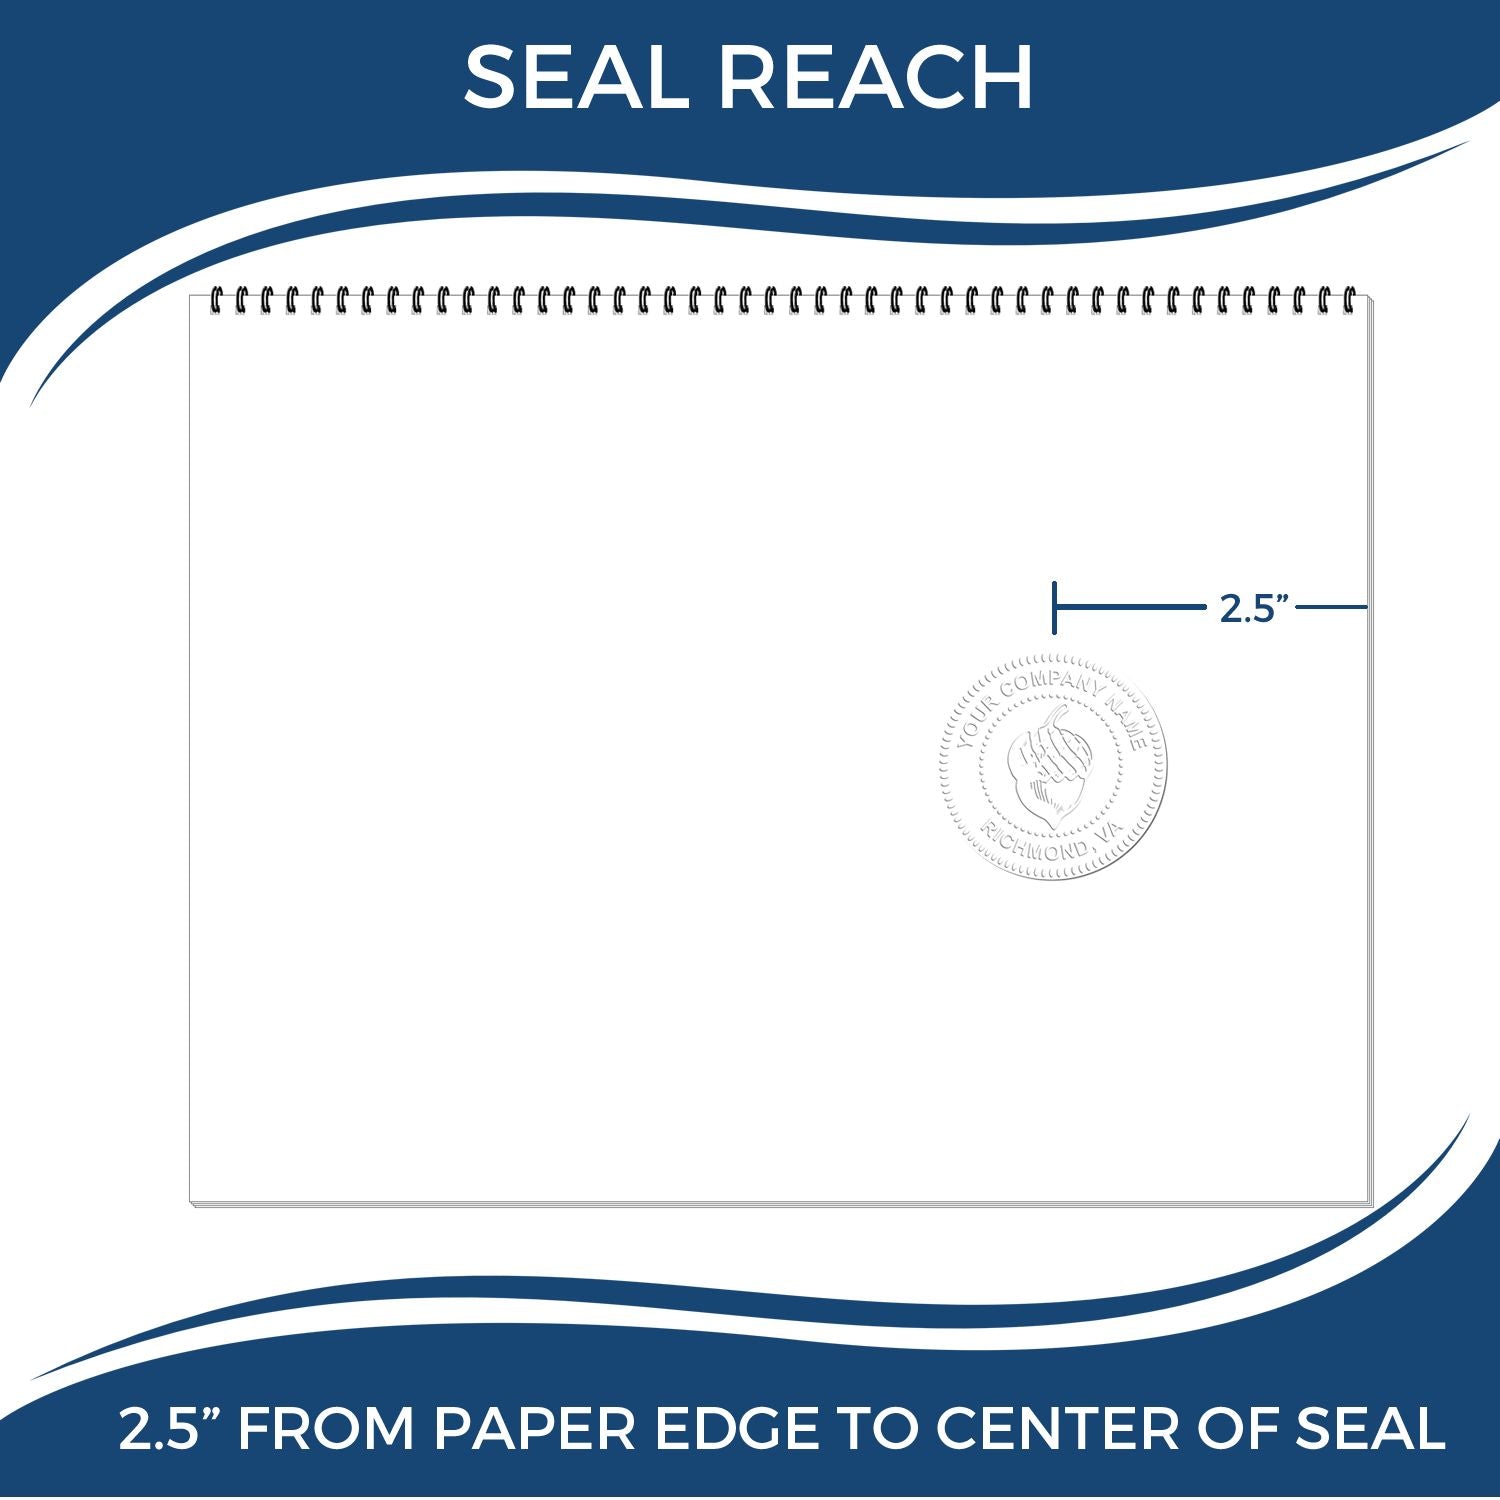 An infographic showing the seal reach which is represented by a ruler and a miniature seal image of the Heavy Duty Cast Iron Nebraska Engineer Seal Embosser